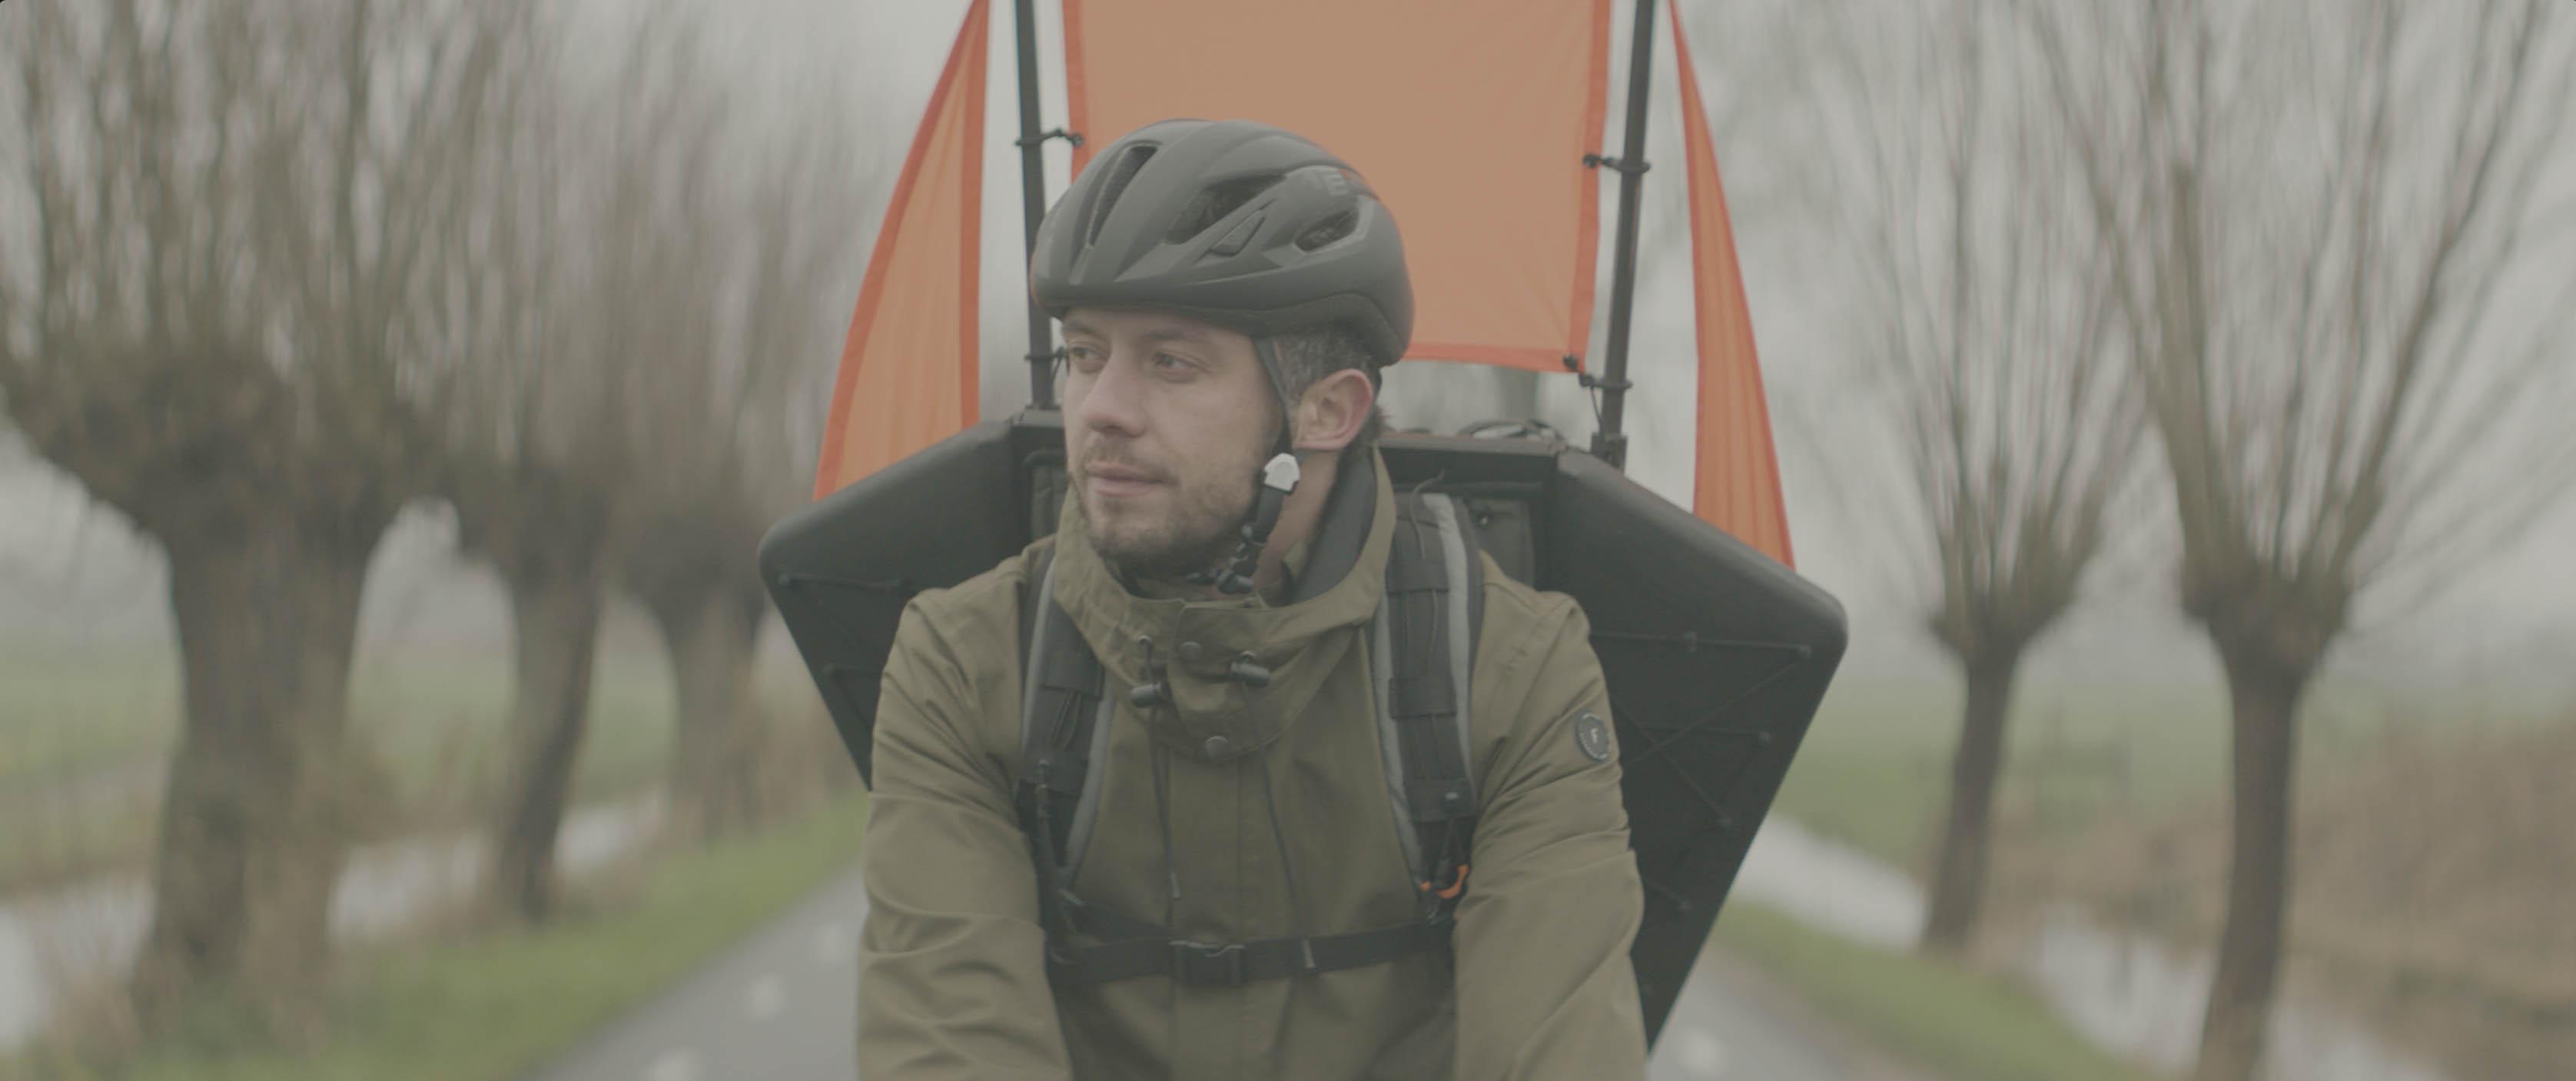 Windbag lets you cycle faster in the greenest way possible